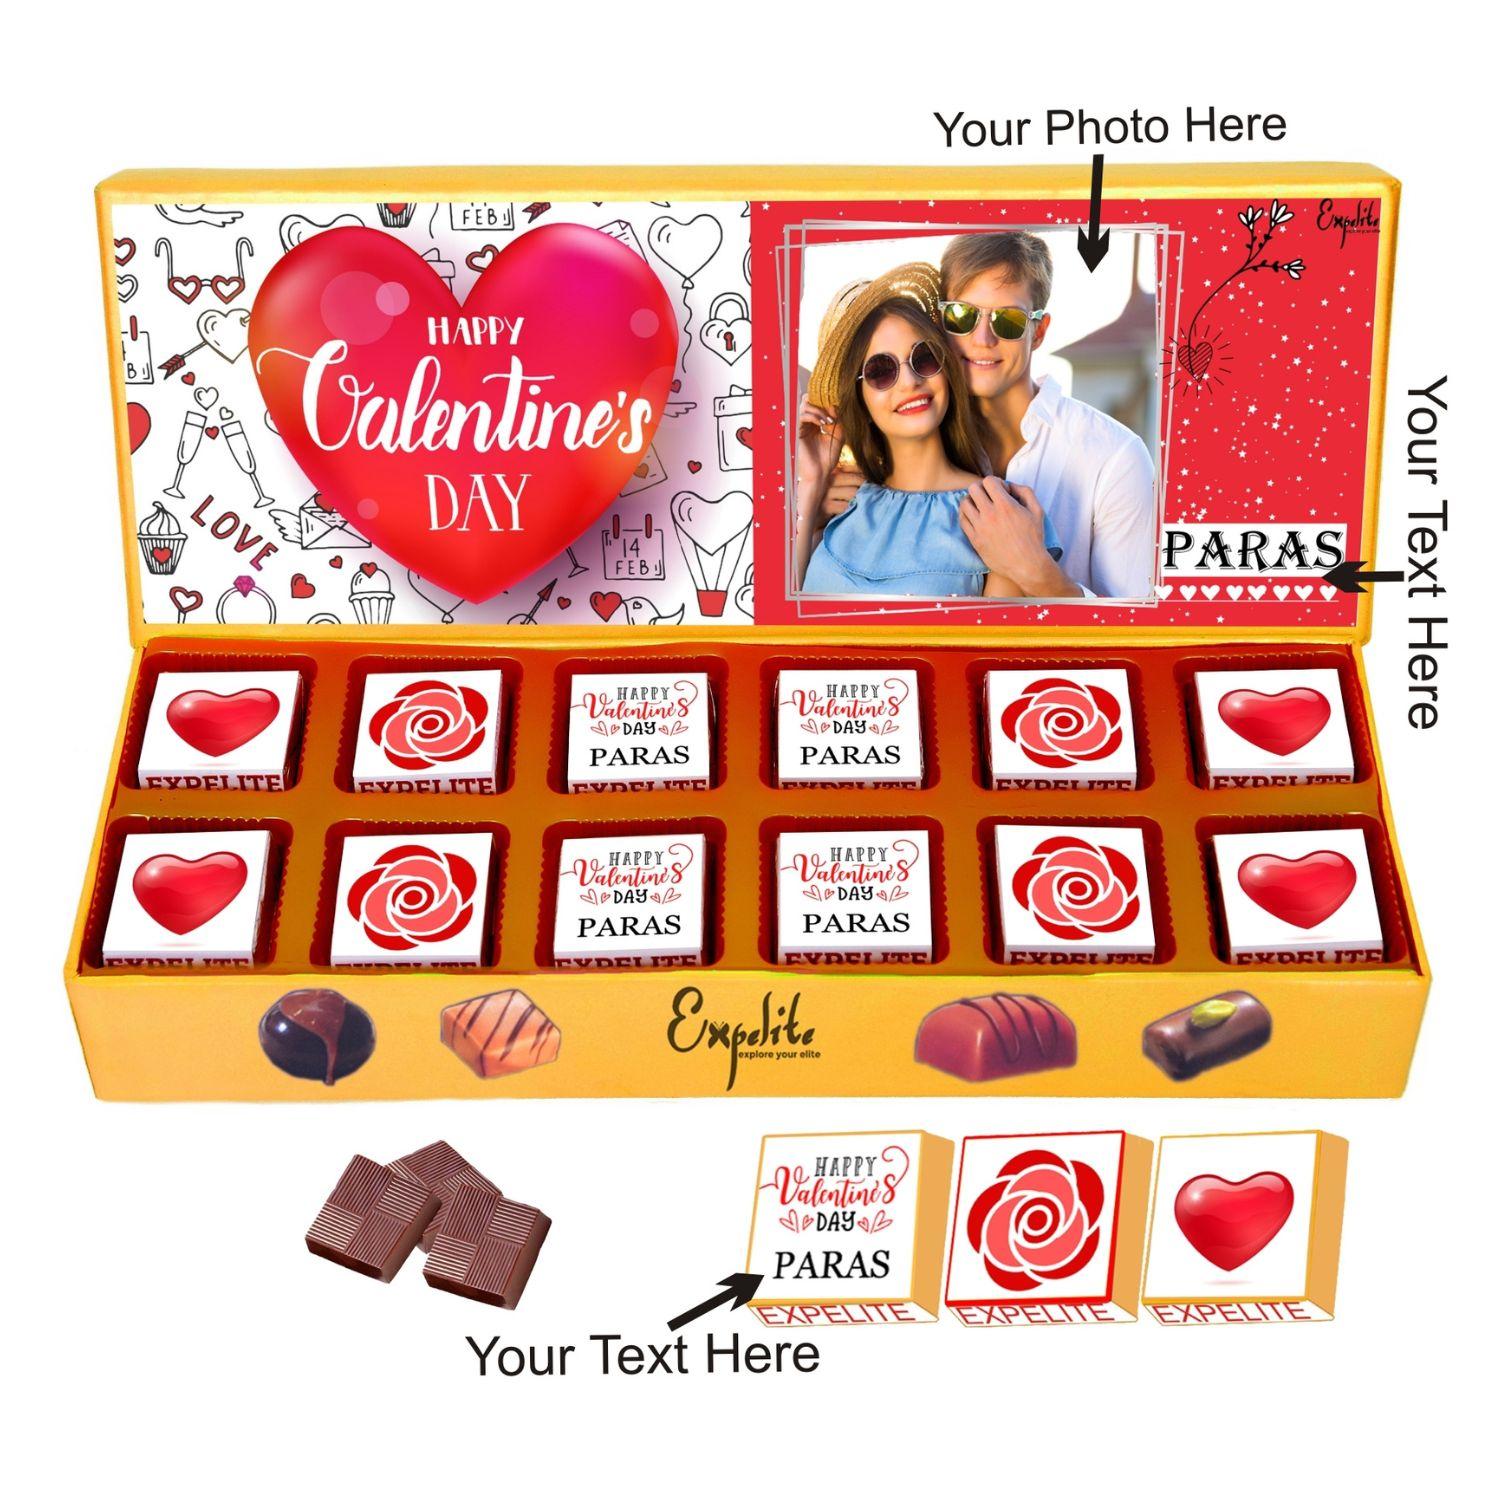 For the Love of Chocolate – Basket Pizzazz